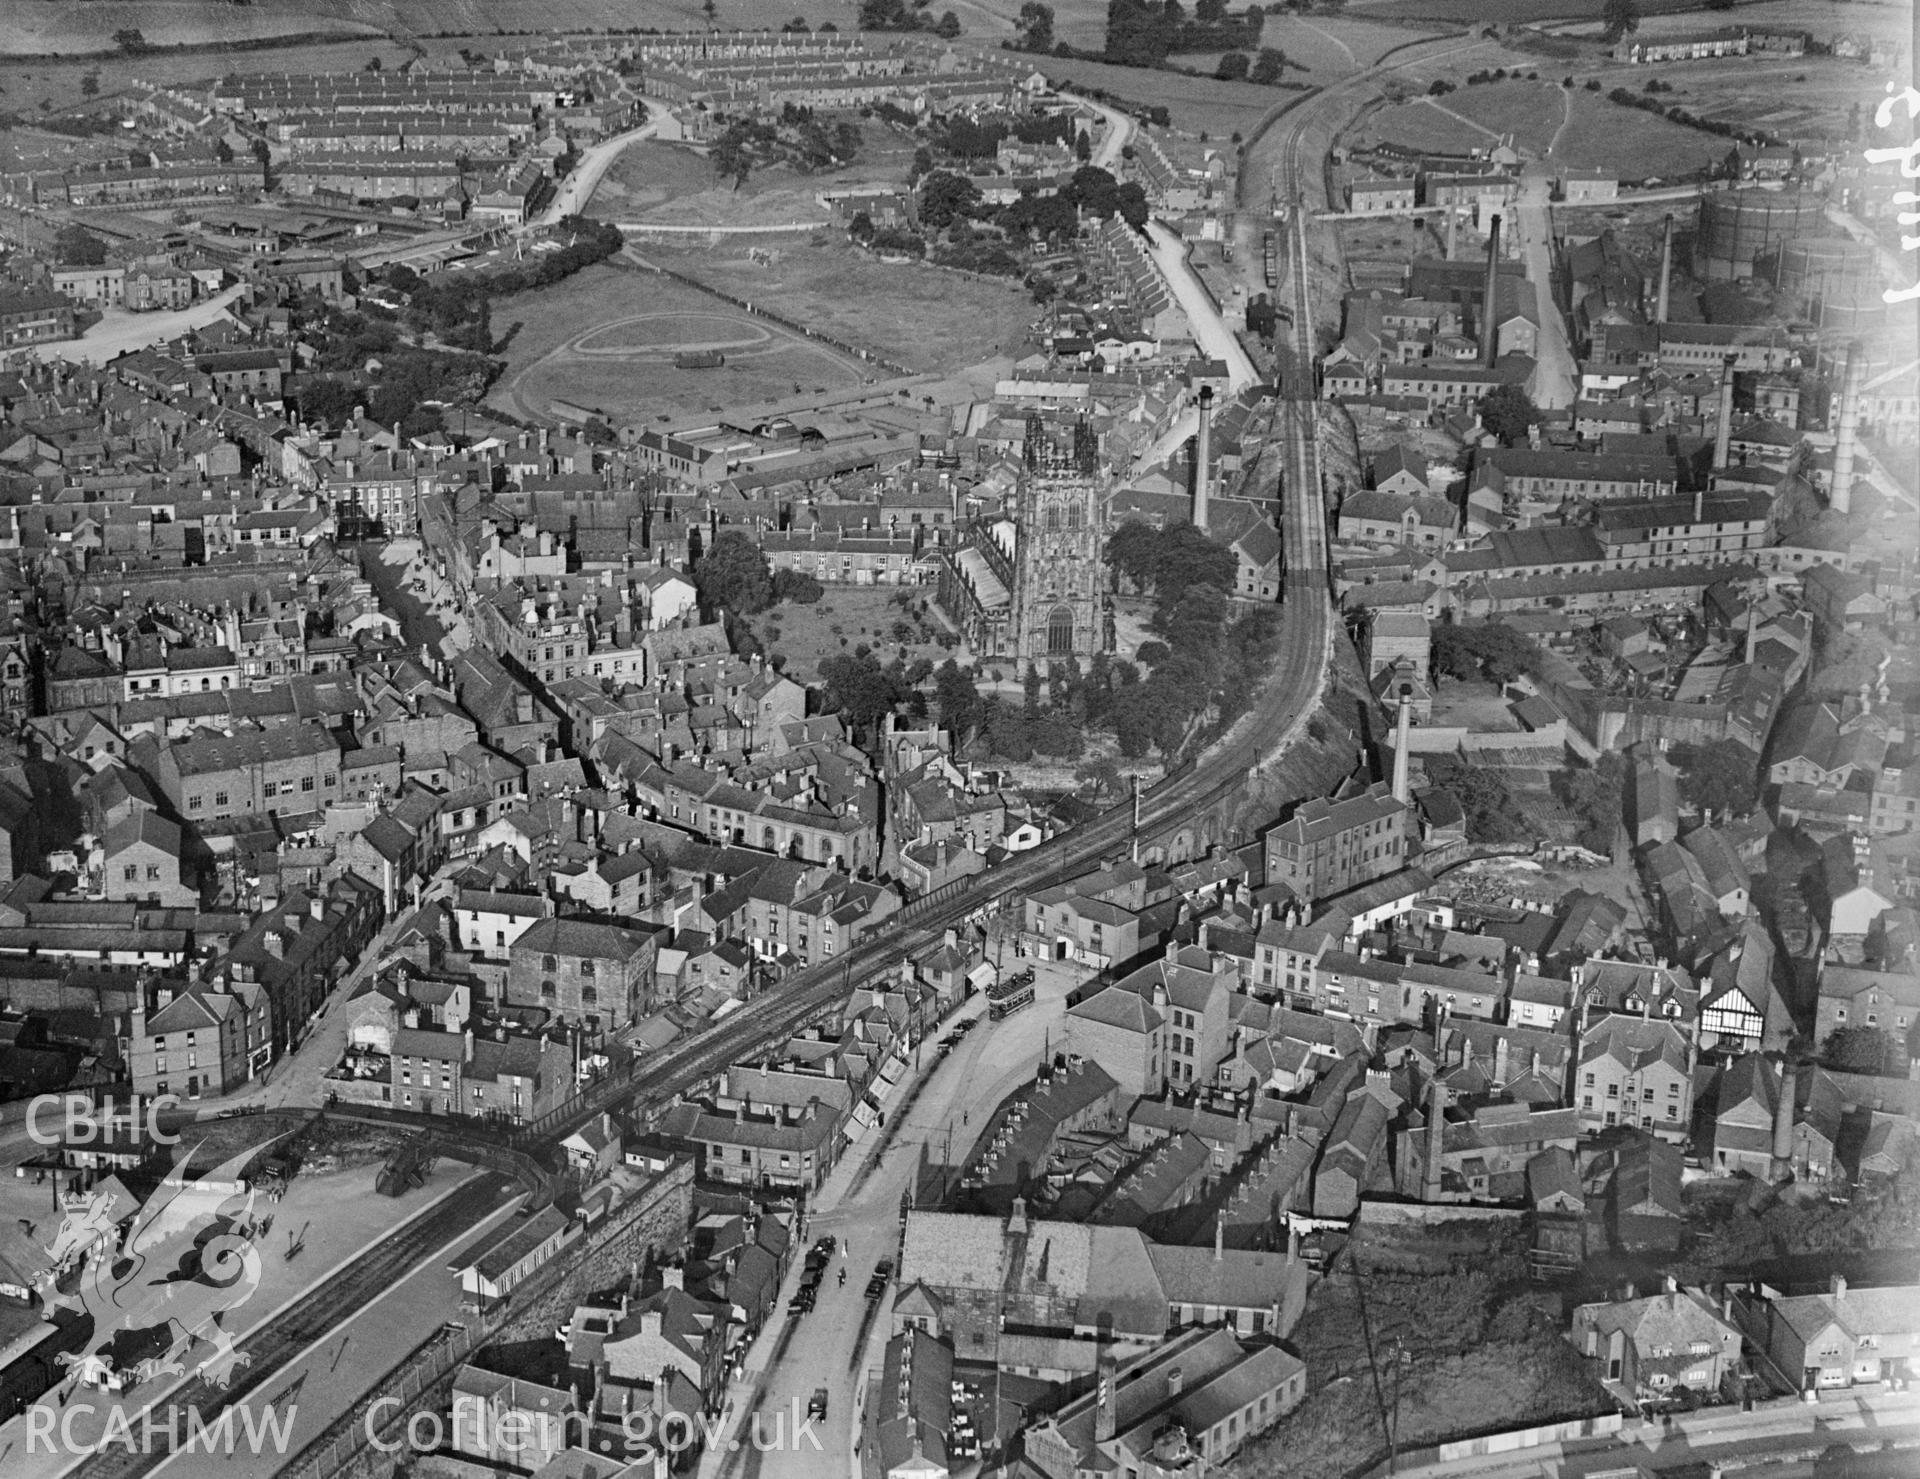 General view of Wrexham, oblique aerial view. 5?x4? black and white glass plate negative.